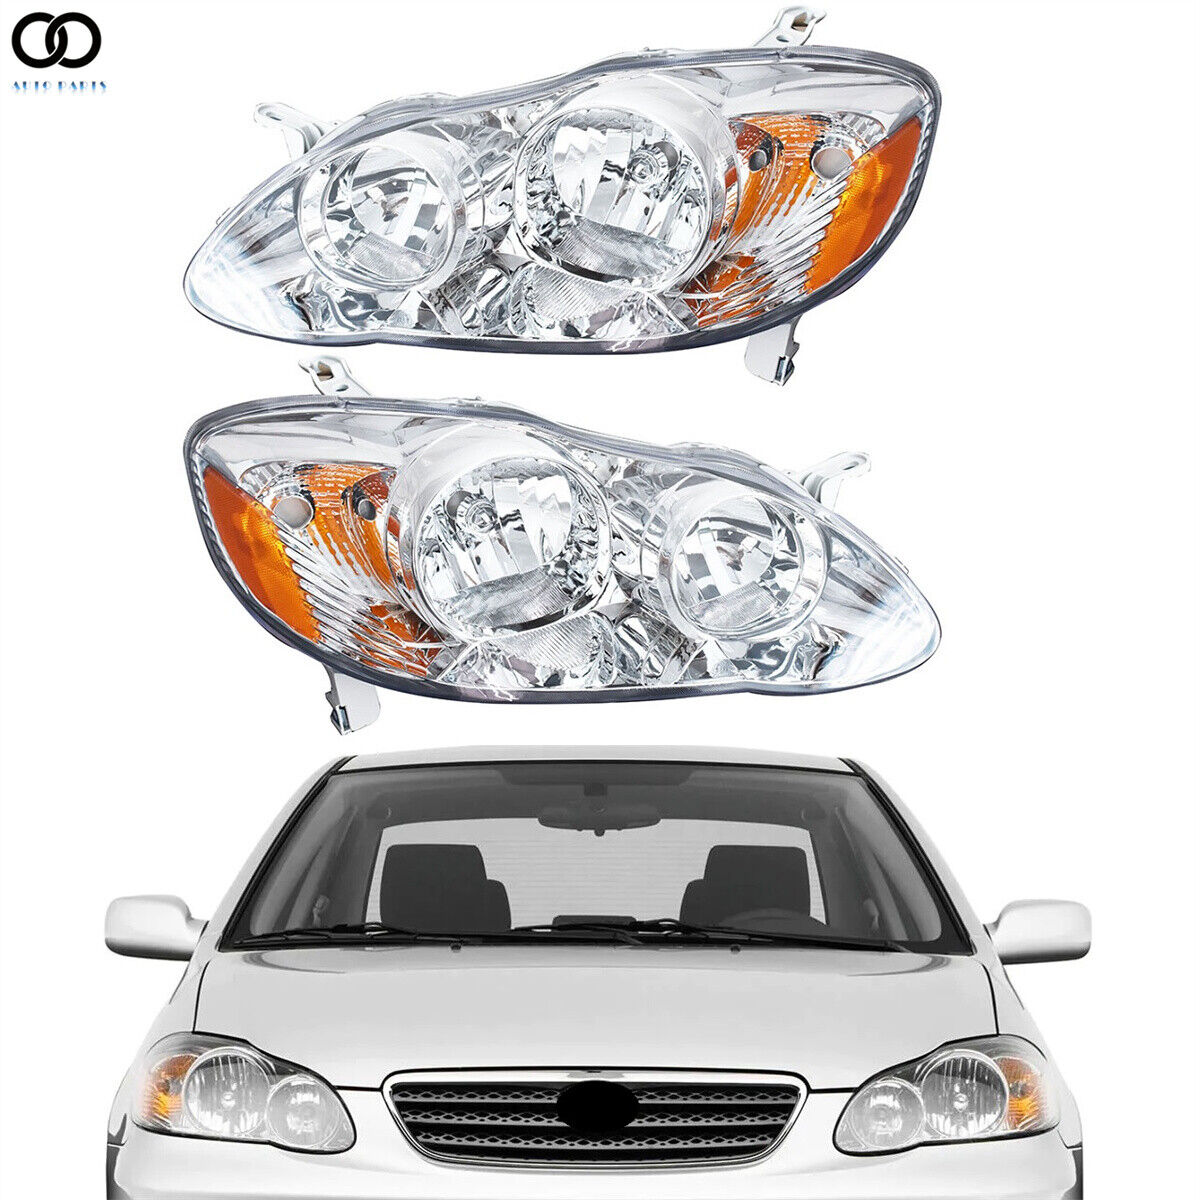 For 2003-2008 Toyota Corolla Clear Replacement Head Lamps Headlights Left+Right